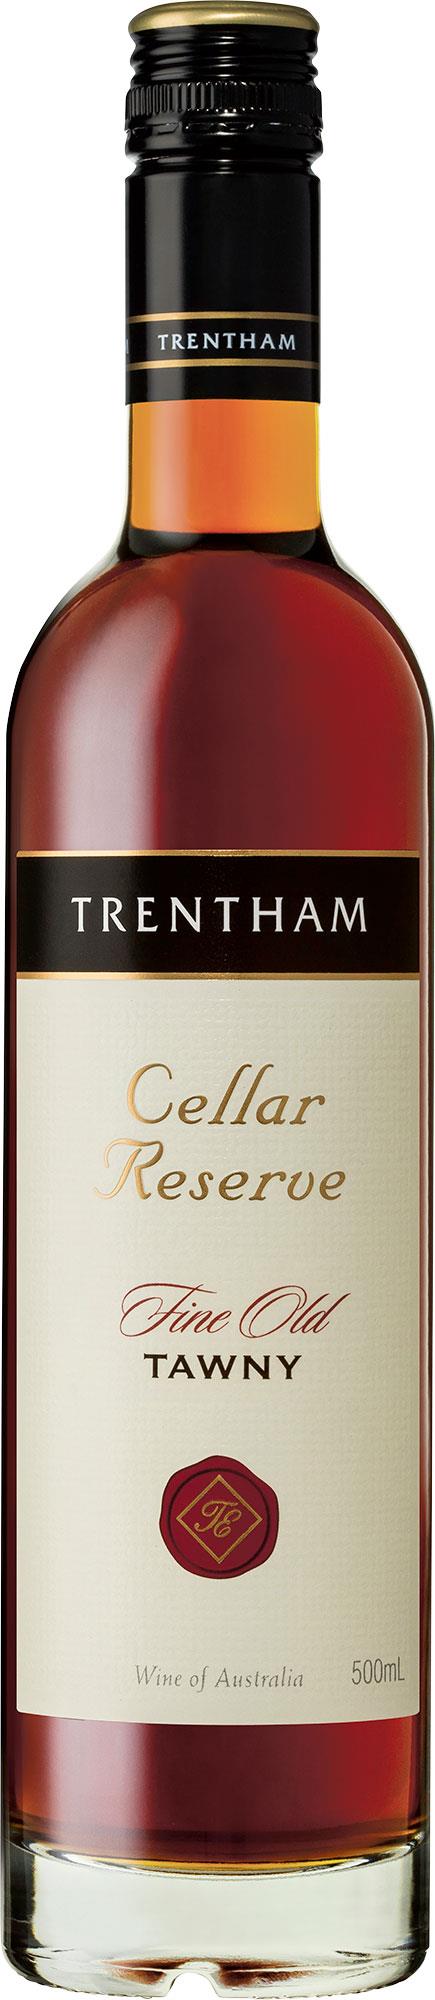 CELLAR RESERVE OLD TAWNY Murray Darling, Trentham 50 cl 18%